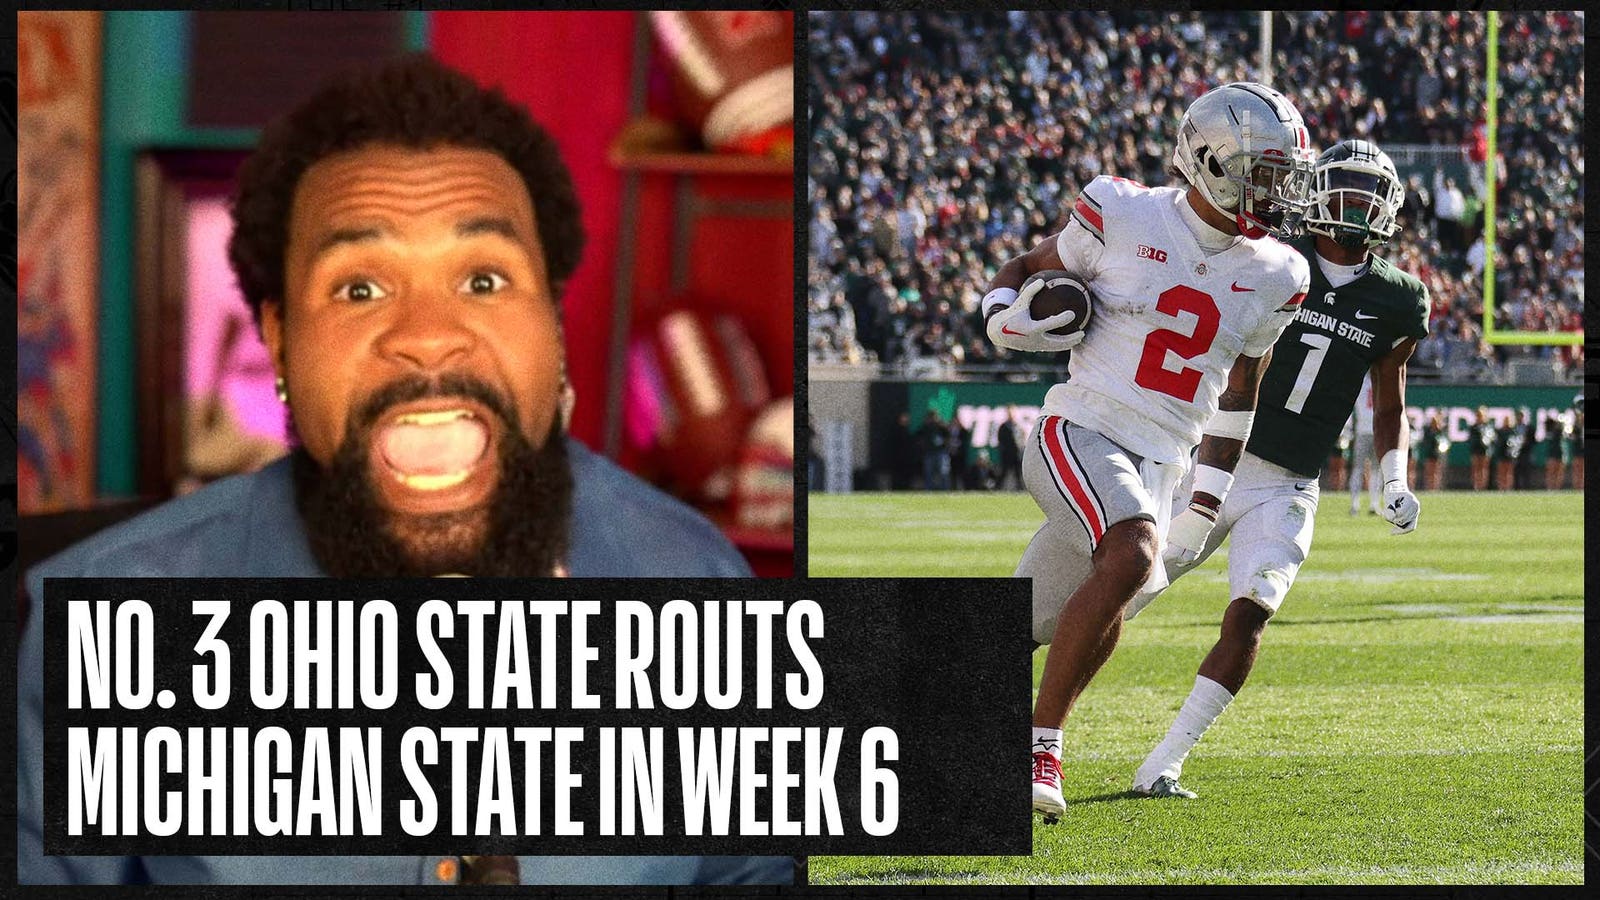 Ohio State defeats Michigan State in Week 6